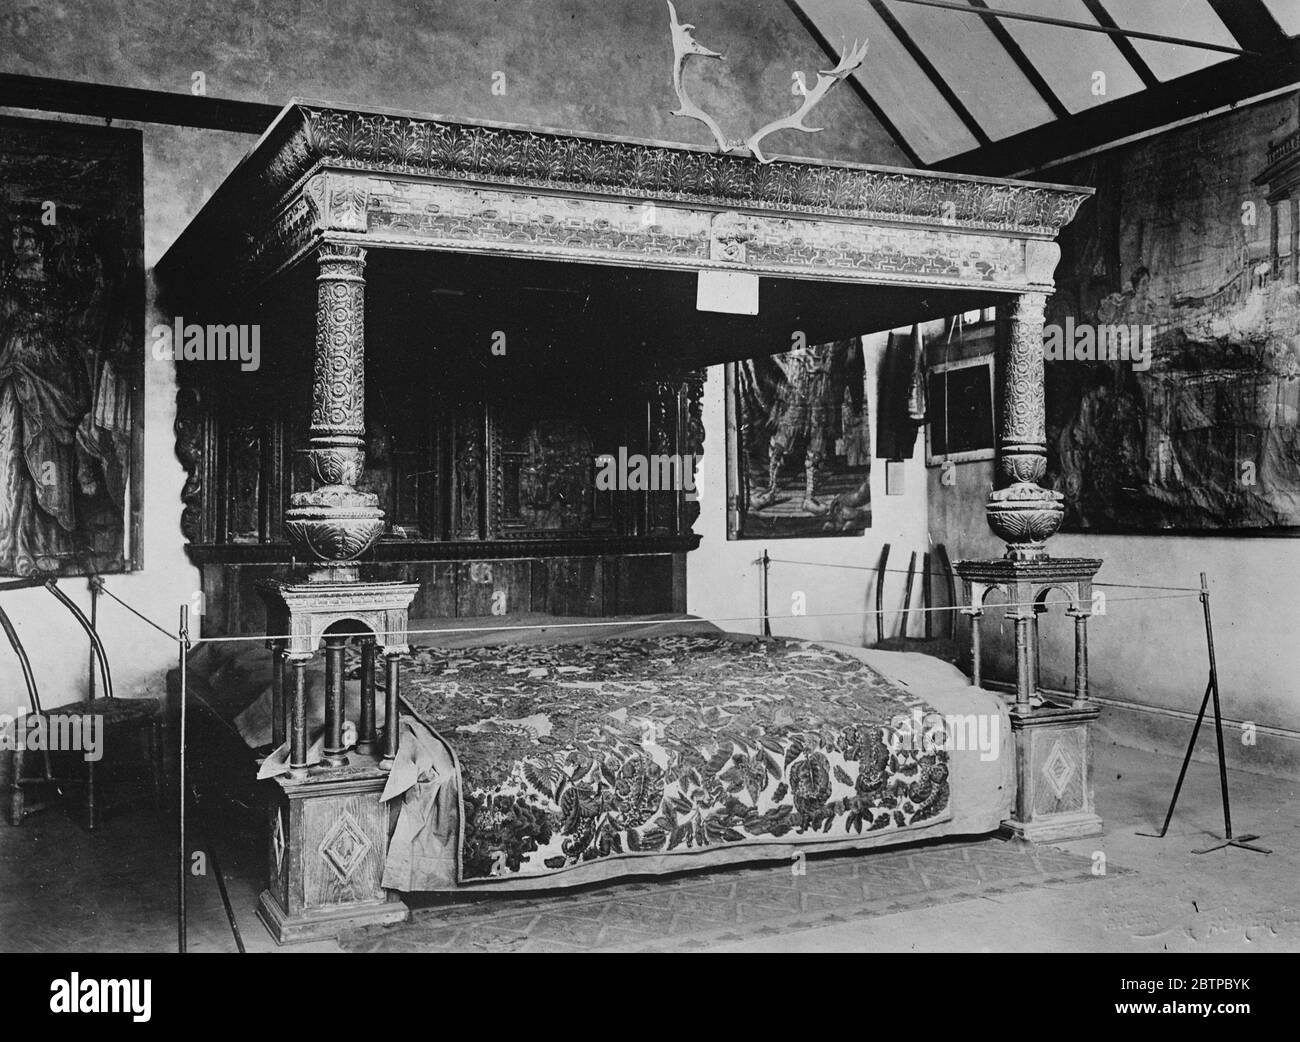 Great Bed of Ware . Acquired by National Art Collection fund . The Great Bed of Ware is 10 ' 9 '' in length and breadth and 7' 6 1/2 '' in height and is one of the most magnificent examples of its period . 10 July 1931 Stock Photo